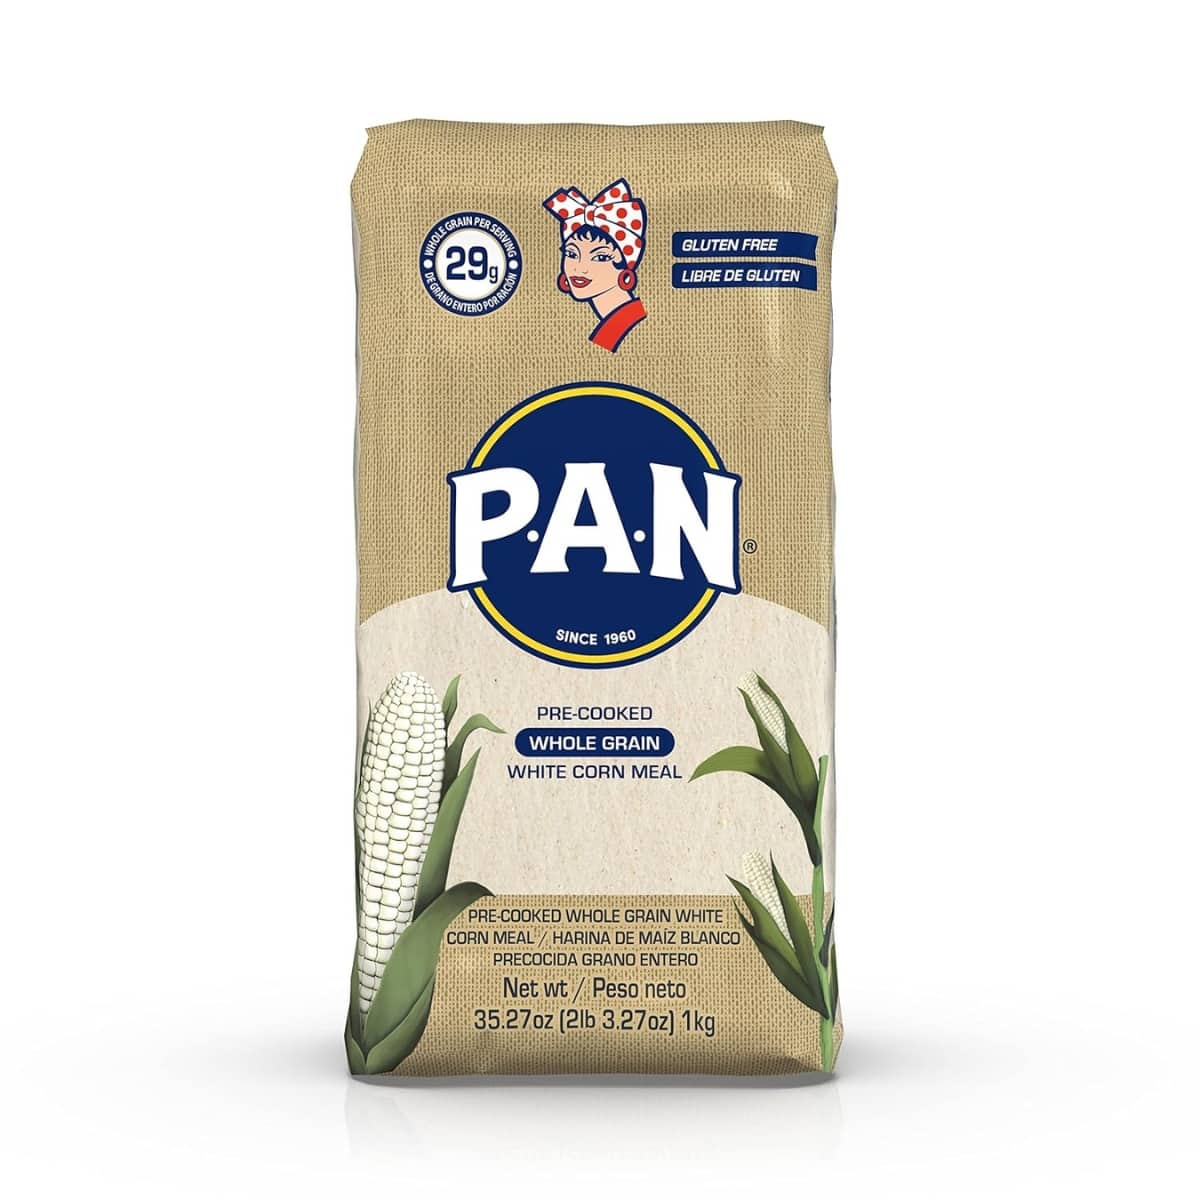 Buy PAN Whole Grain White Corn Meal (Pre-Cooked) - 1 kg